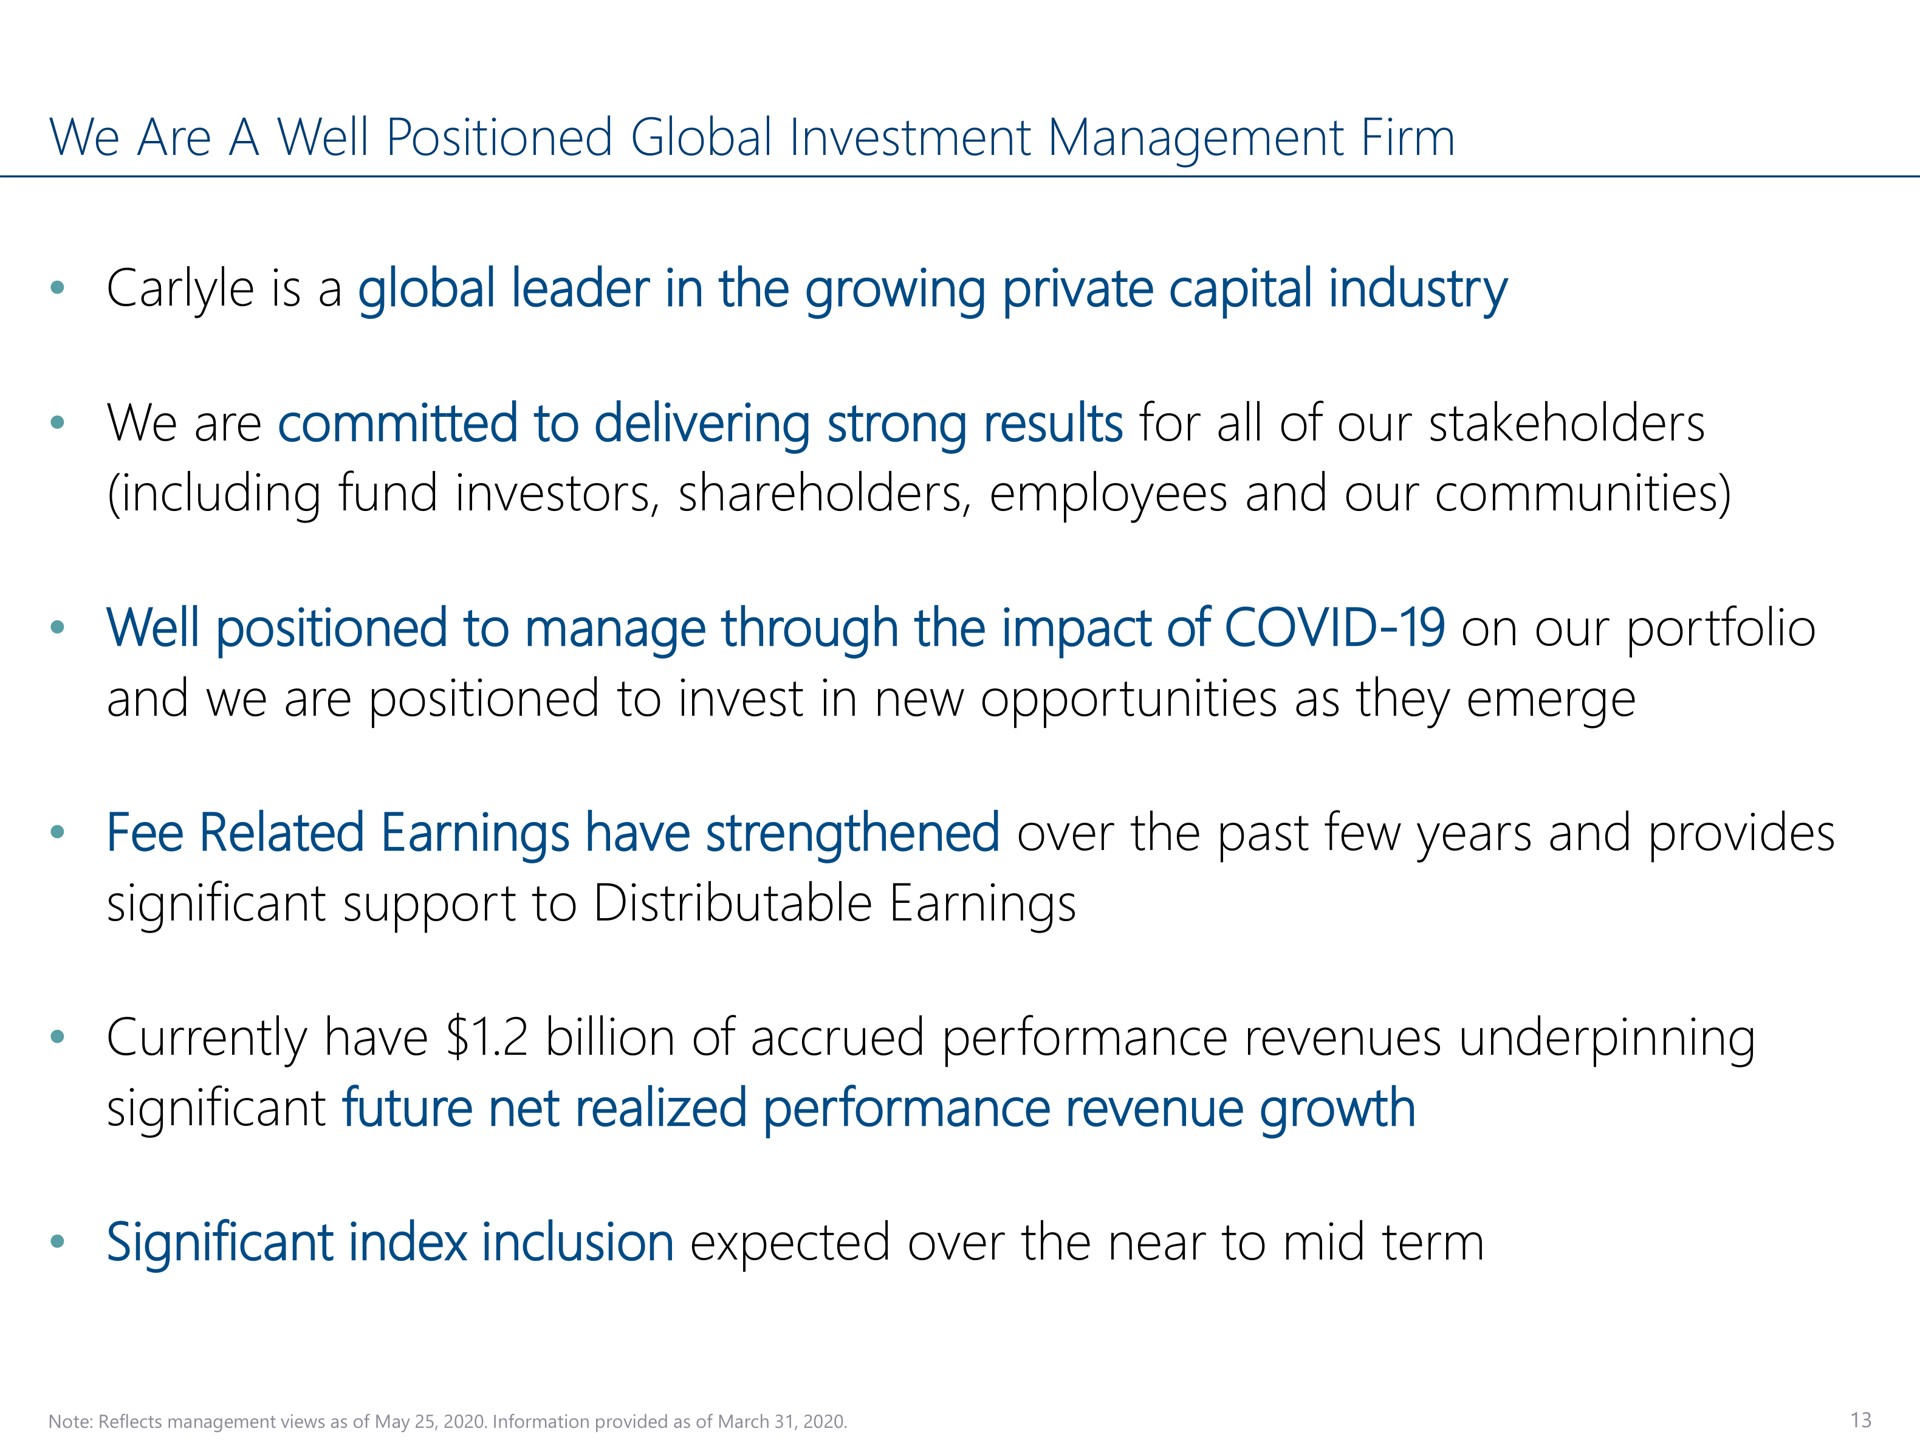 we are a well positioned global investment management firm is a global leader in the growing private capital industry we are committed to delivering strong results for all of our stakeholders including fund investors shareholders employees and our communities well positioned to manage through the impact of covid on our portfolio and we are positioned to invest in new opportunities as they emerge fee related earnings have strengthened over the past few years and provides significant support to distributable earnings currently have billion of accrued performance revenues underpinning significant future net realized performance revenue growth significant index inclusion expected over the near to mid term tund | Carlyle